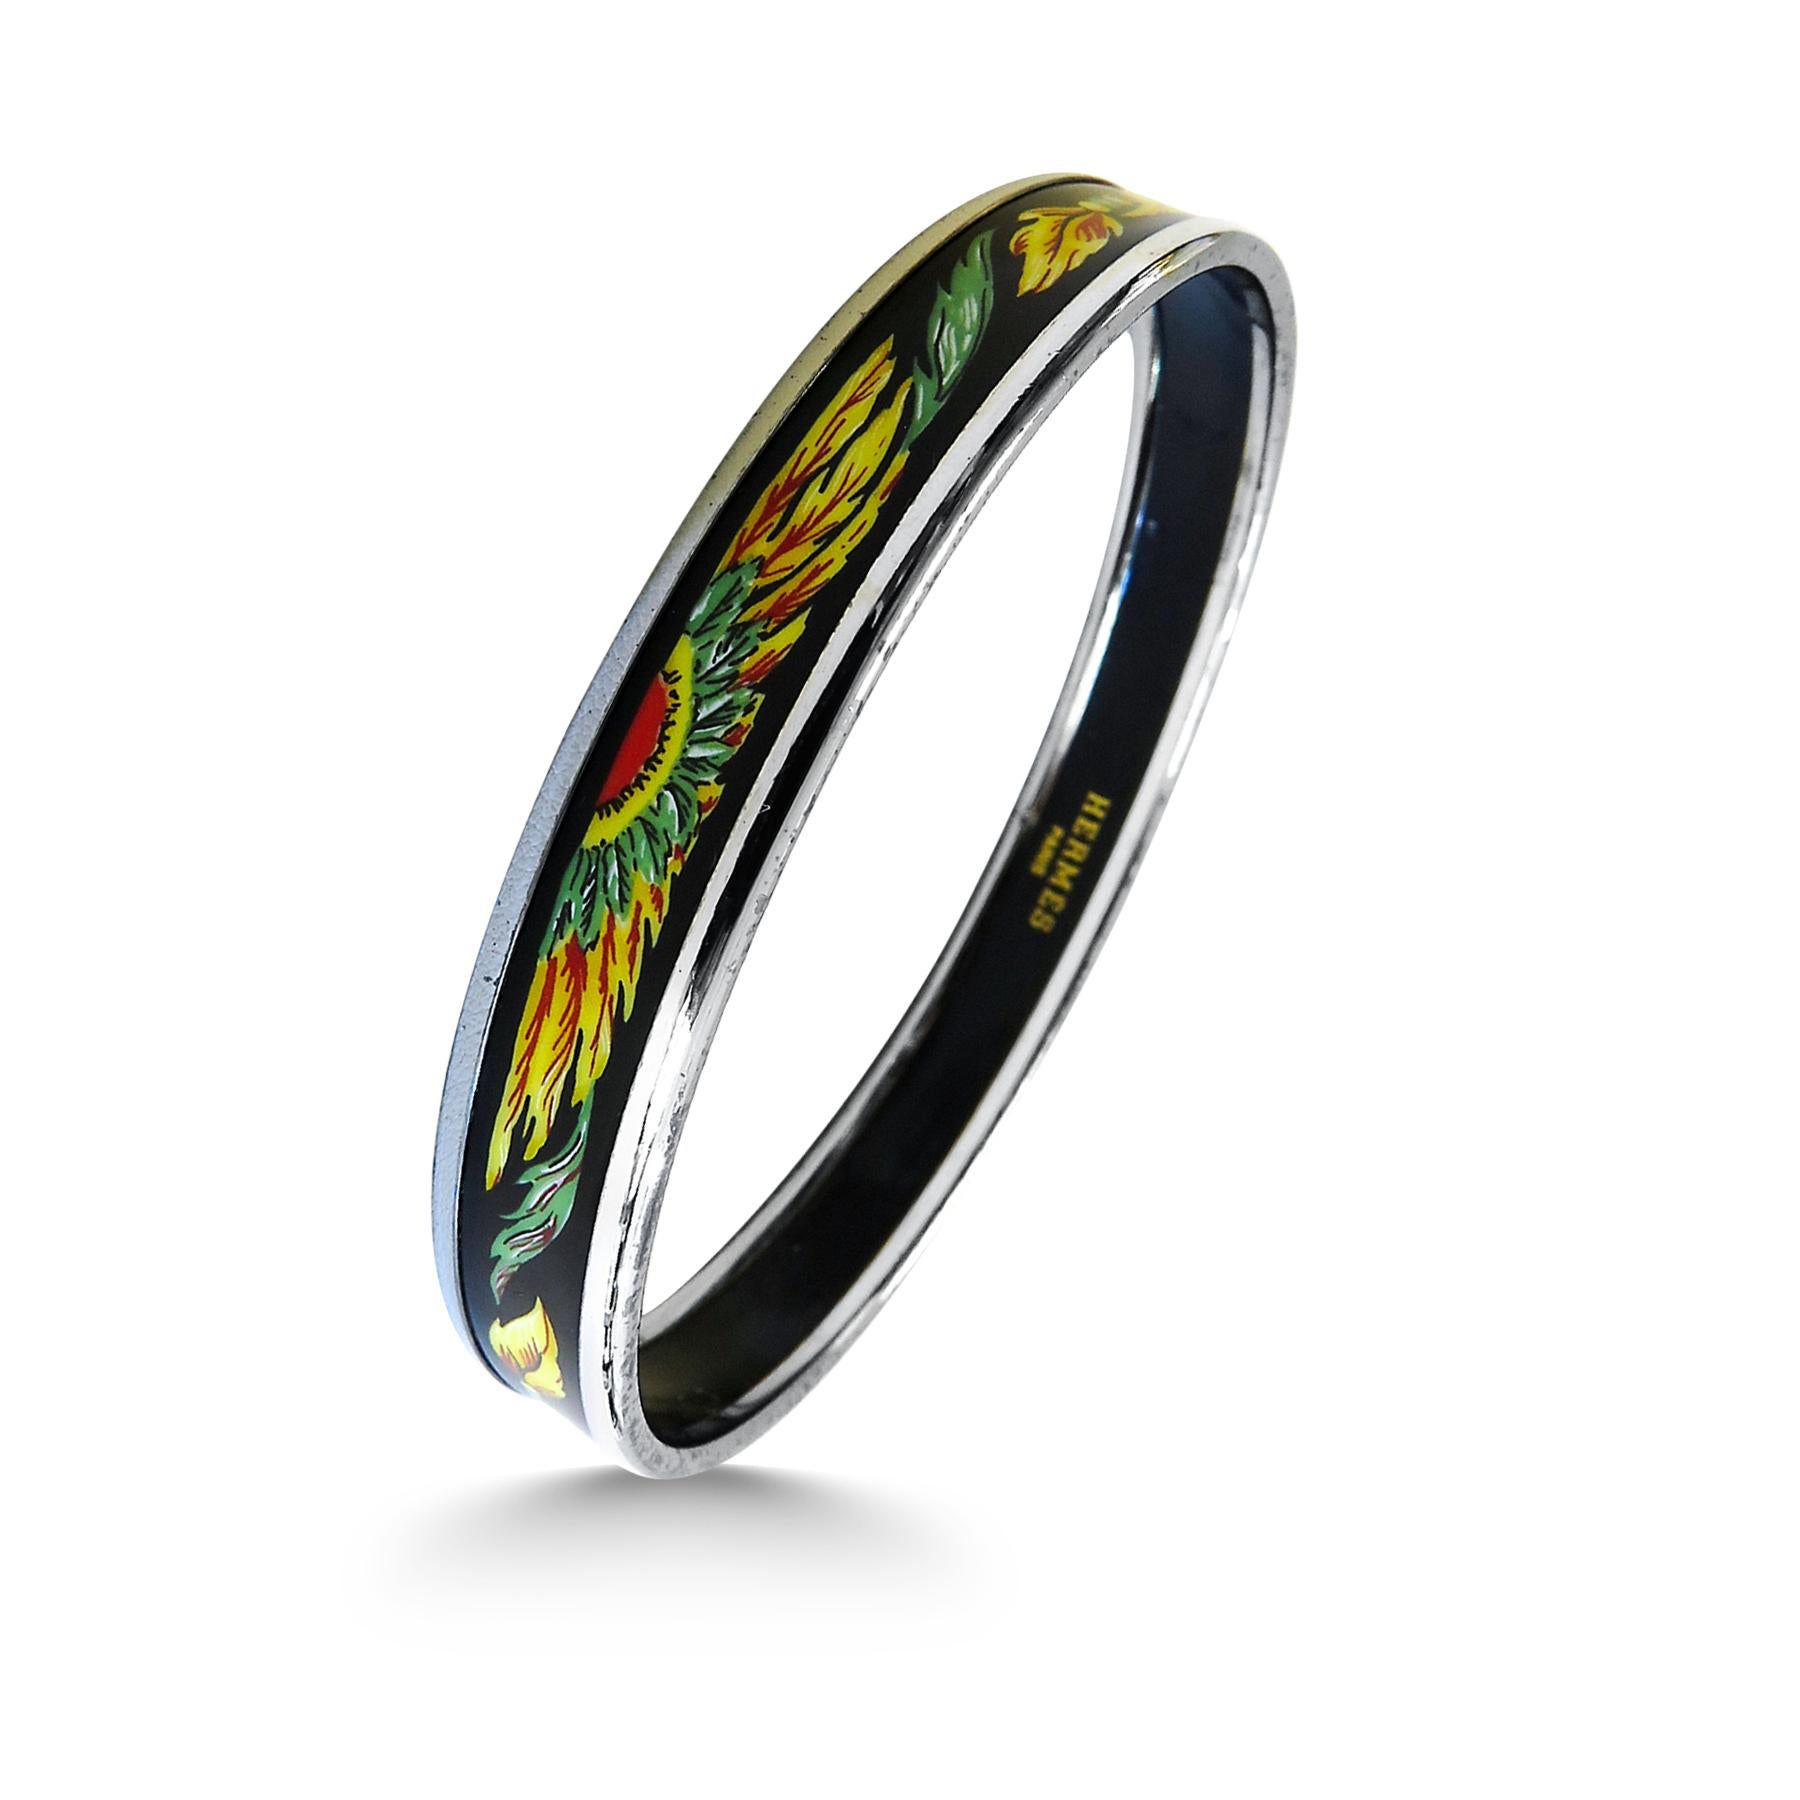 This Hermes bangle features platinum plated with a printed enamel. Carved in Austria, It weighs 22.5 grams, 10mm wide and has an inner diameter of 2.7 inches to give a comfortable fit in your wrist.

Condition: Discoloration on both sides and edges  